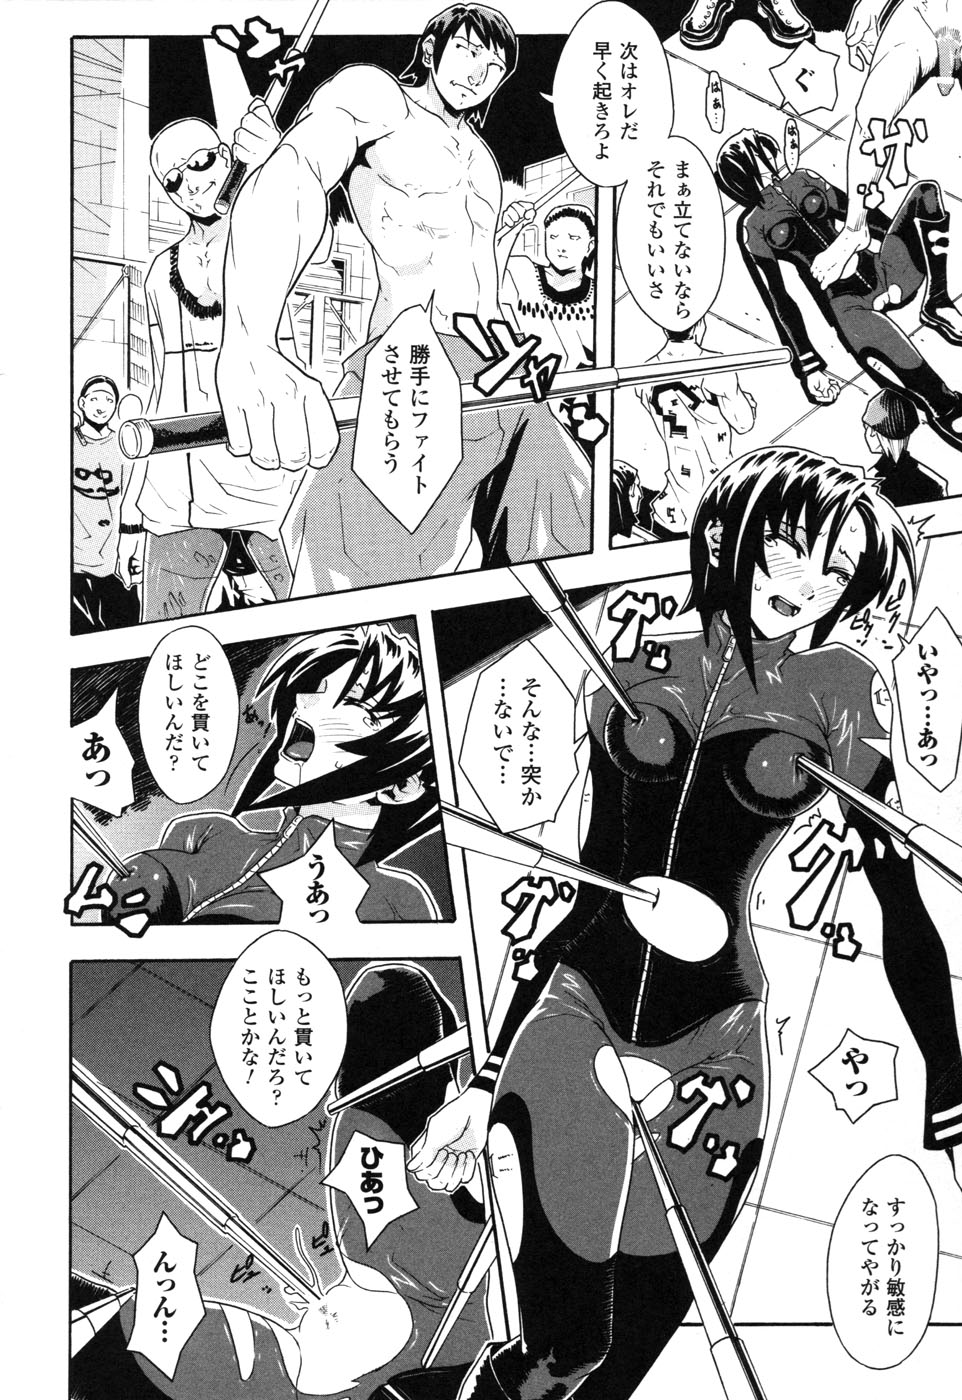 Rider Suit Heroine Anthology Comics 2 page 22 full